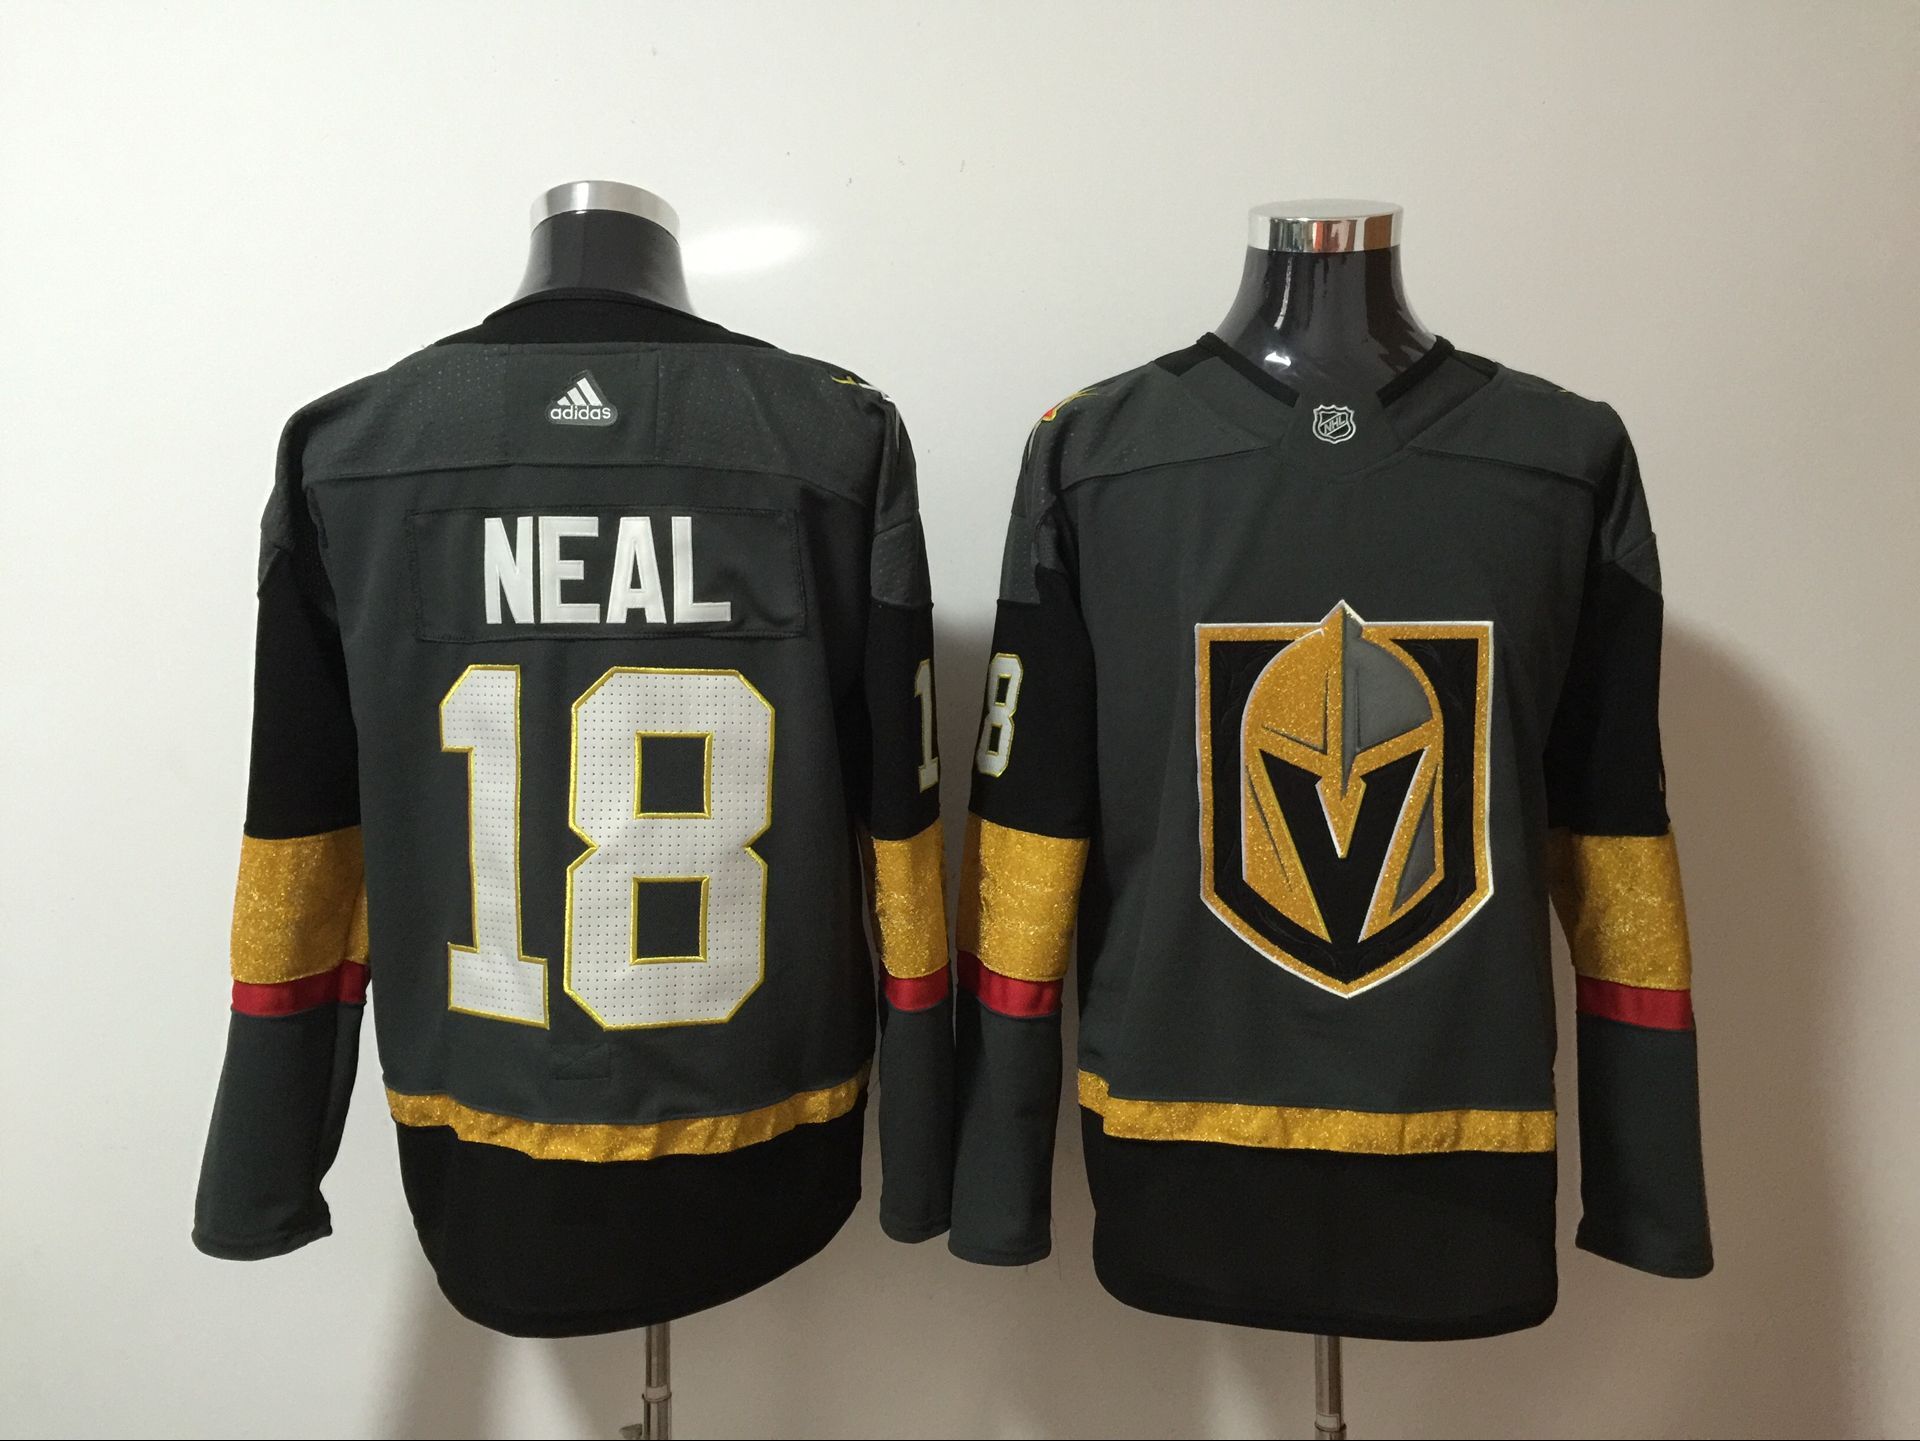 Vegas Golden Knights 18 James Neal Gray With Special Glittery Logo Adidas Jersey